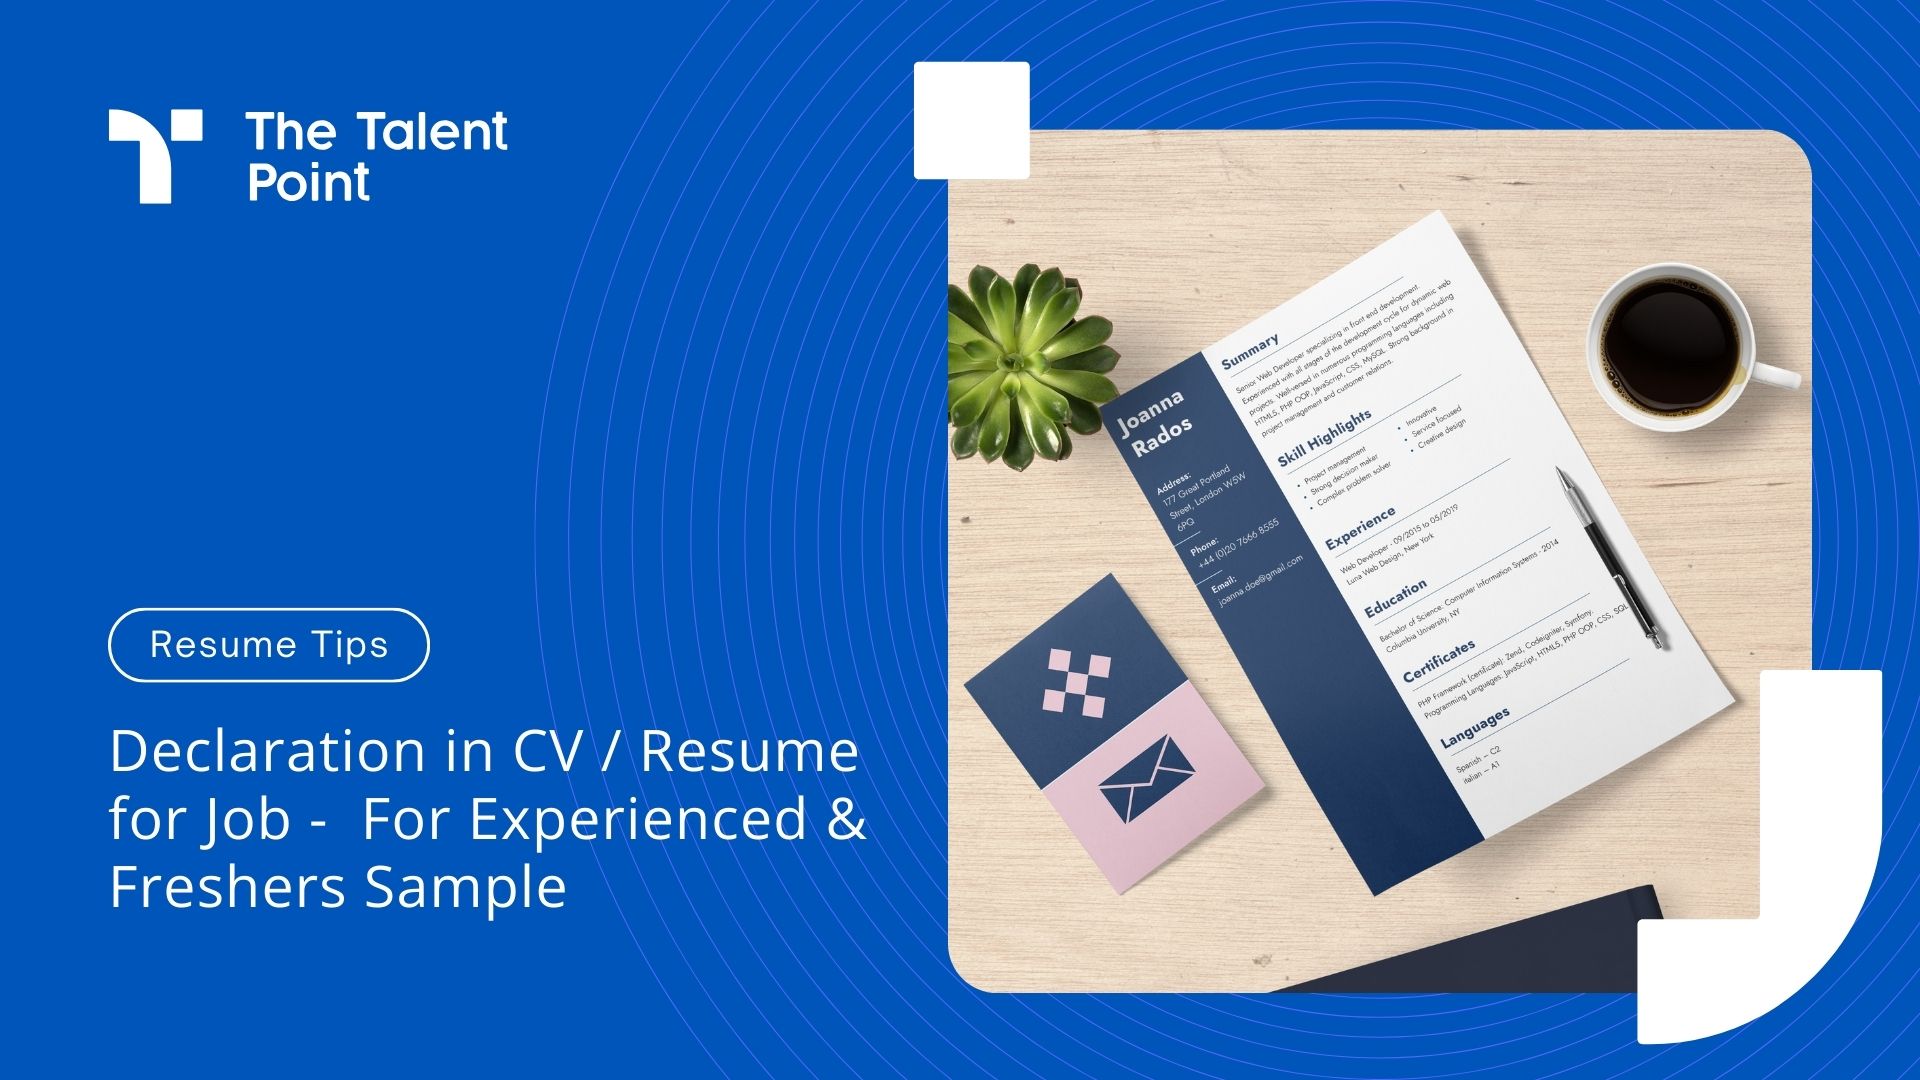 Declaration in CV / Resume for Job -  For Experienced & Freshers Sample - TalentPoint